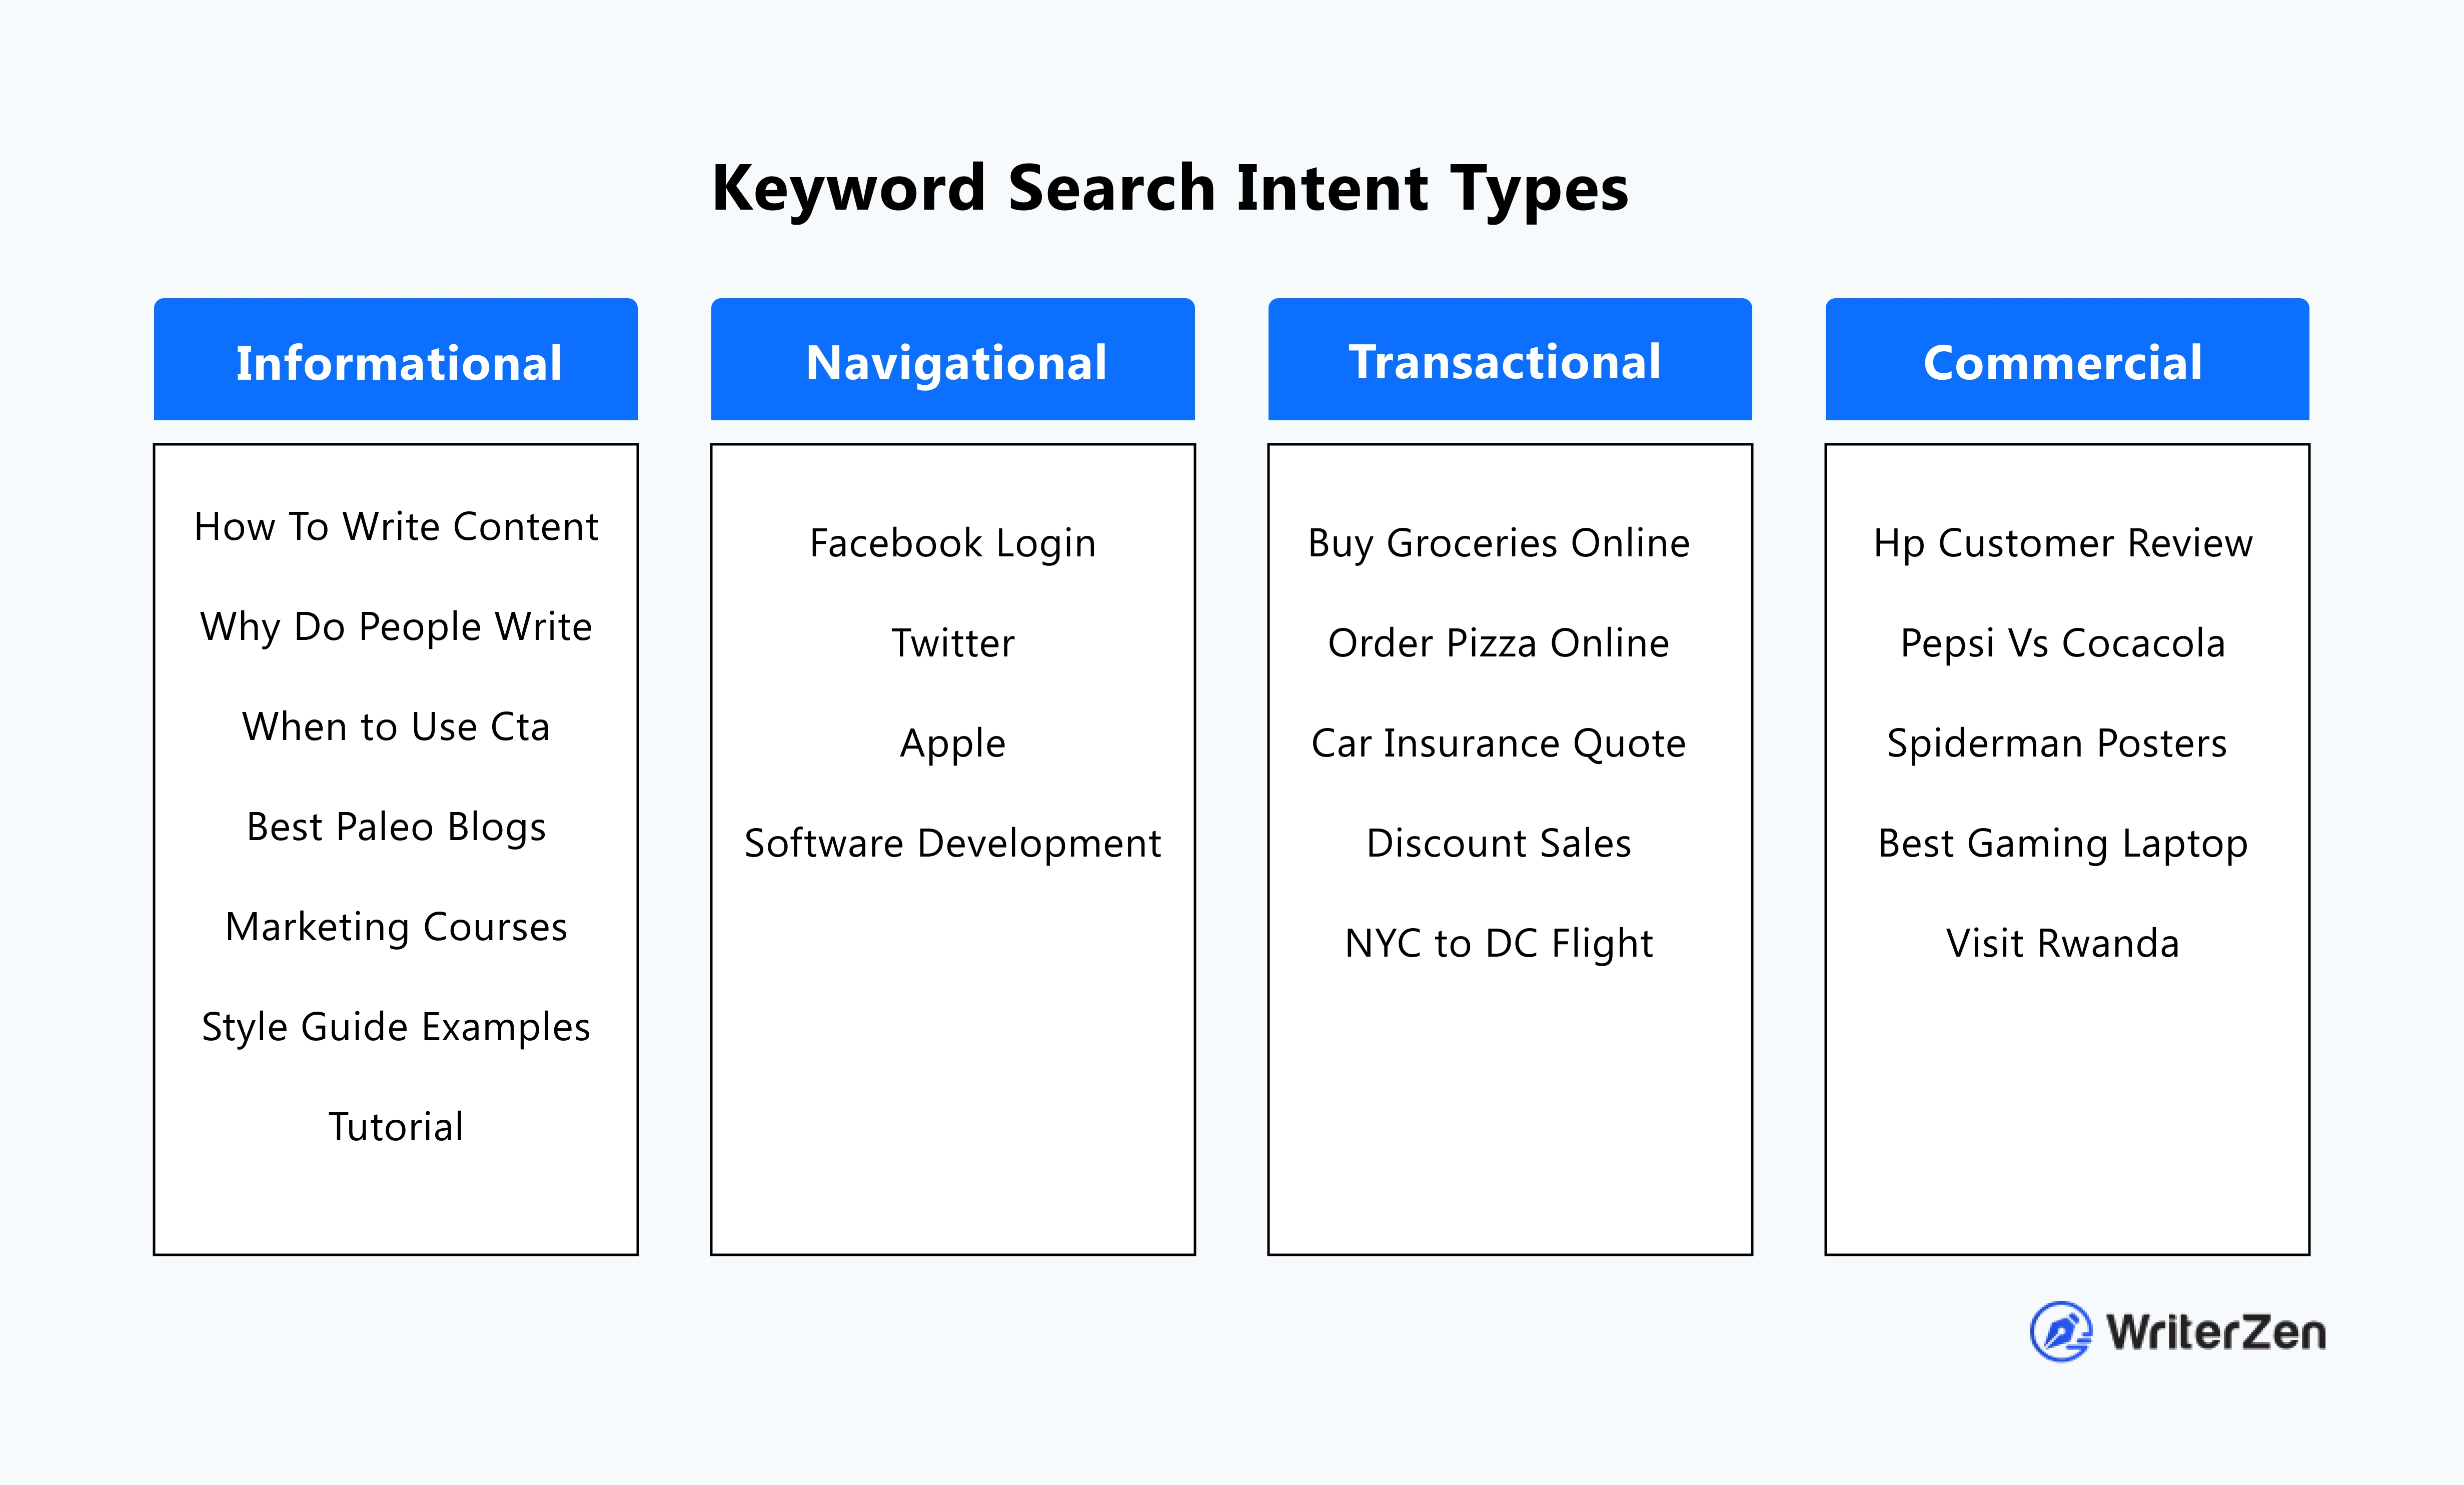 Keywords used for each search intent type